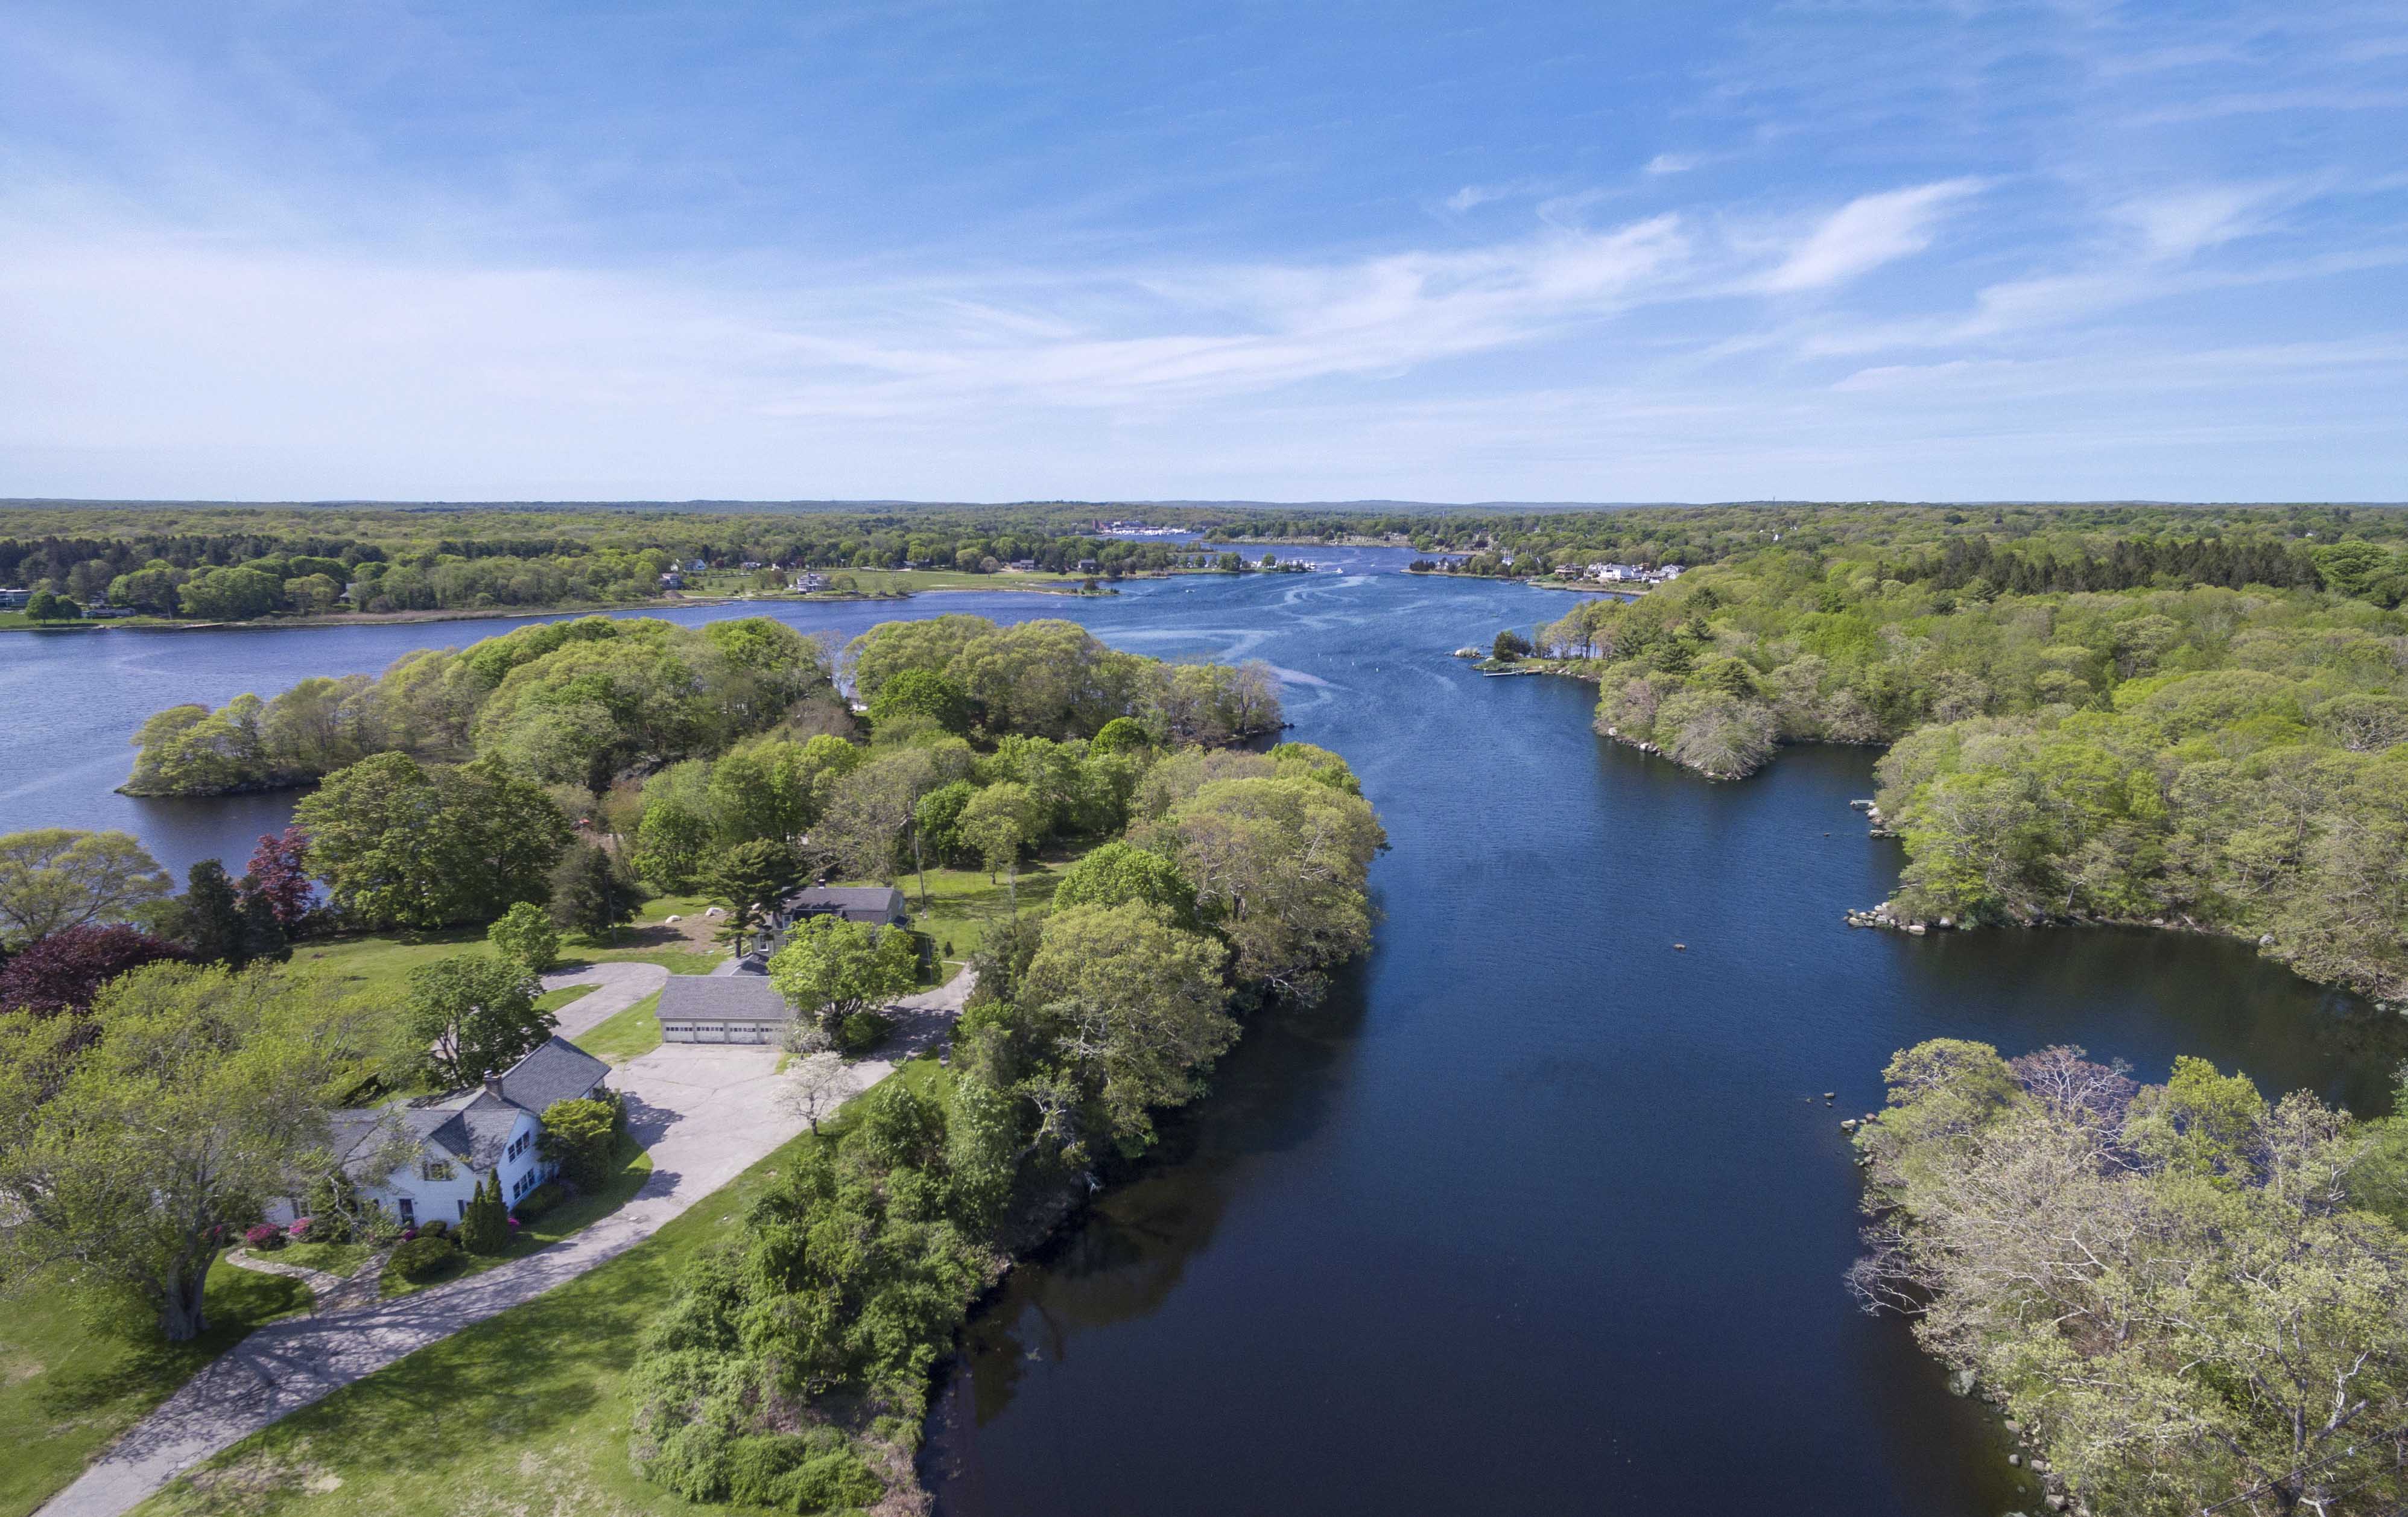 WATERFRONT MULTI-FAMILY COMPOUND IN WESTERLY SELLS FOR $2.5M WITH LILA DELMAN REAL ESTATE ON BOTH SIDES OF THE TRANSACTION